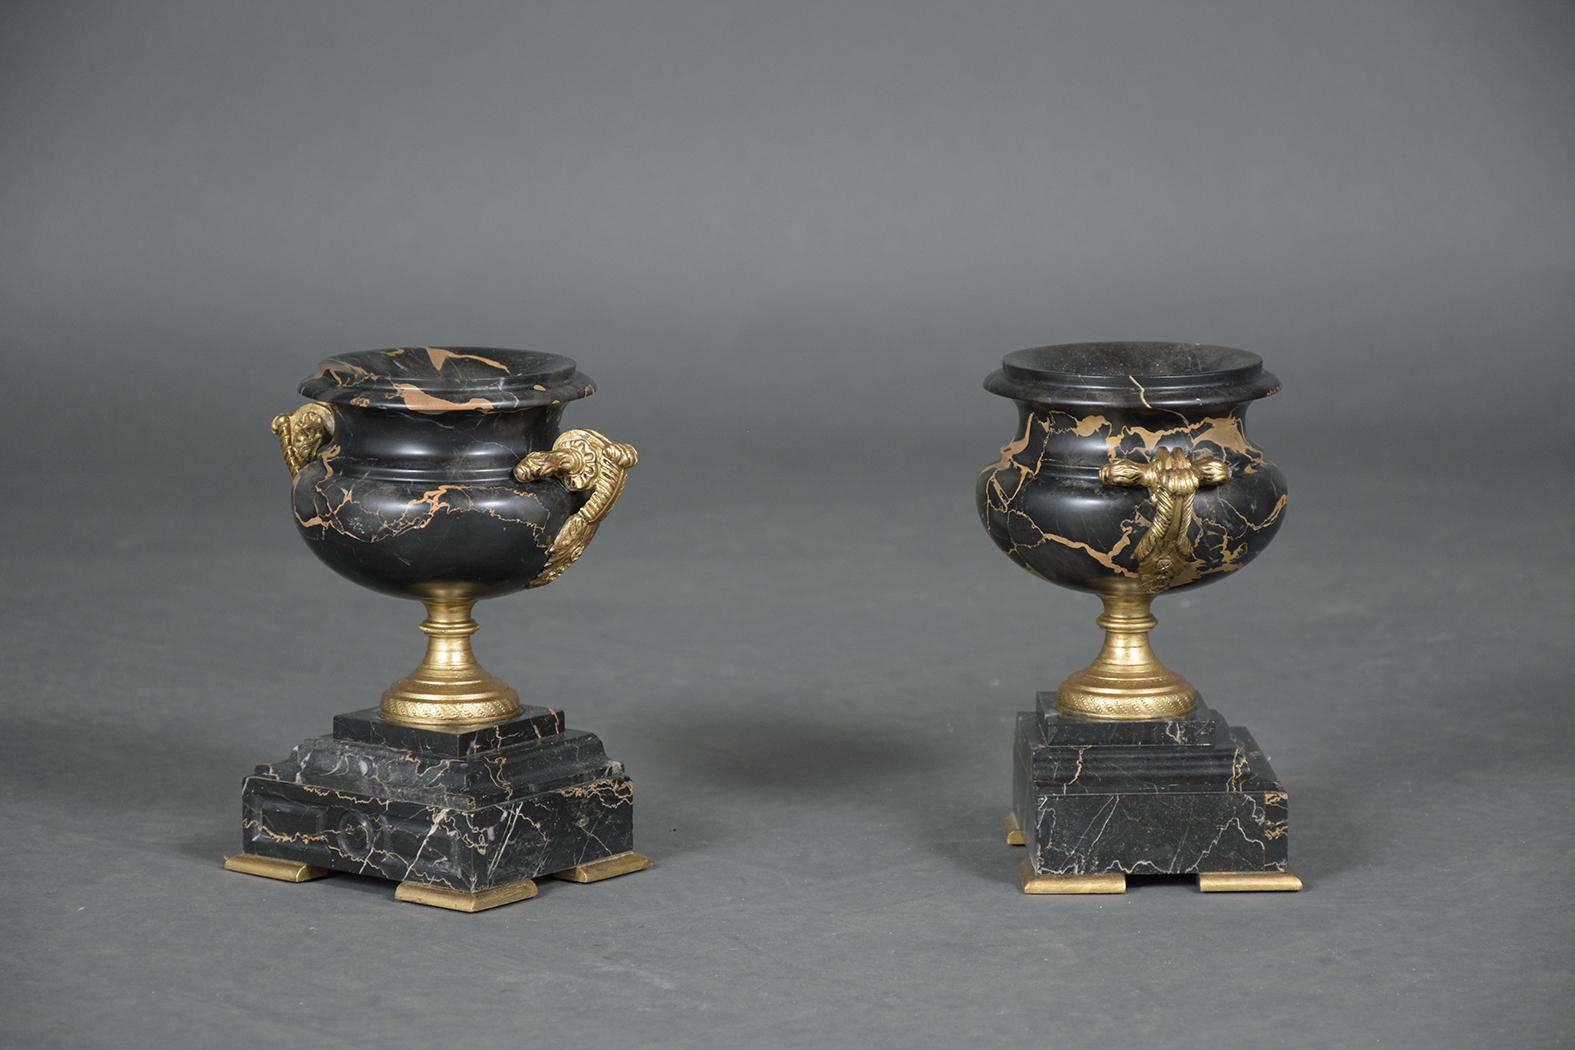 Patinated Pair of Antique Empire Marble Urns